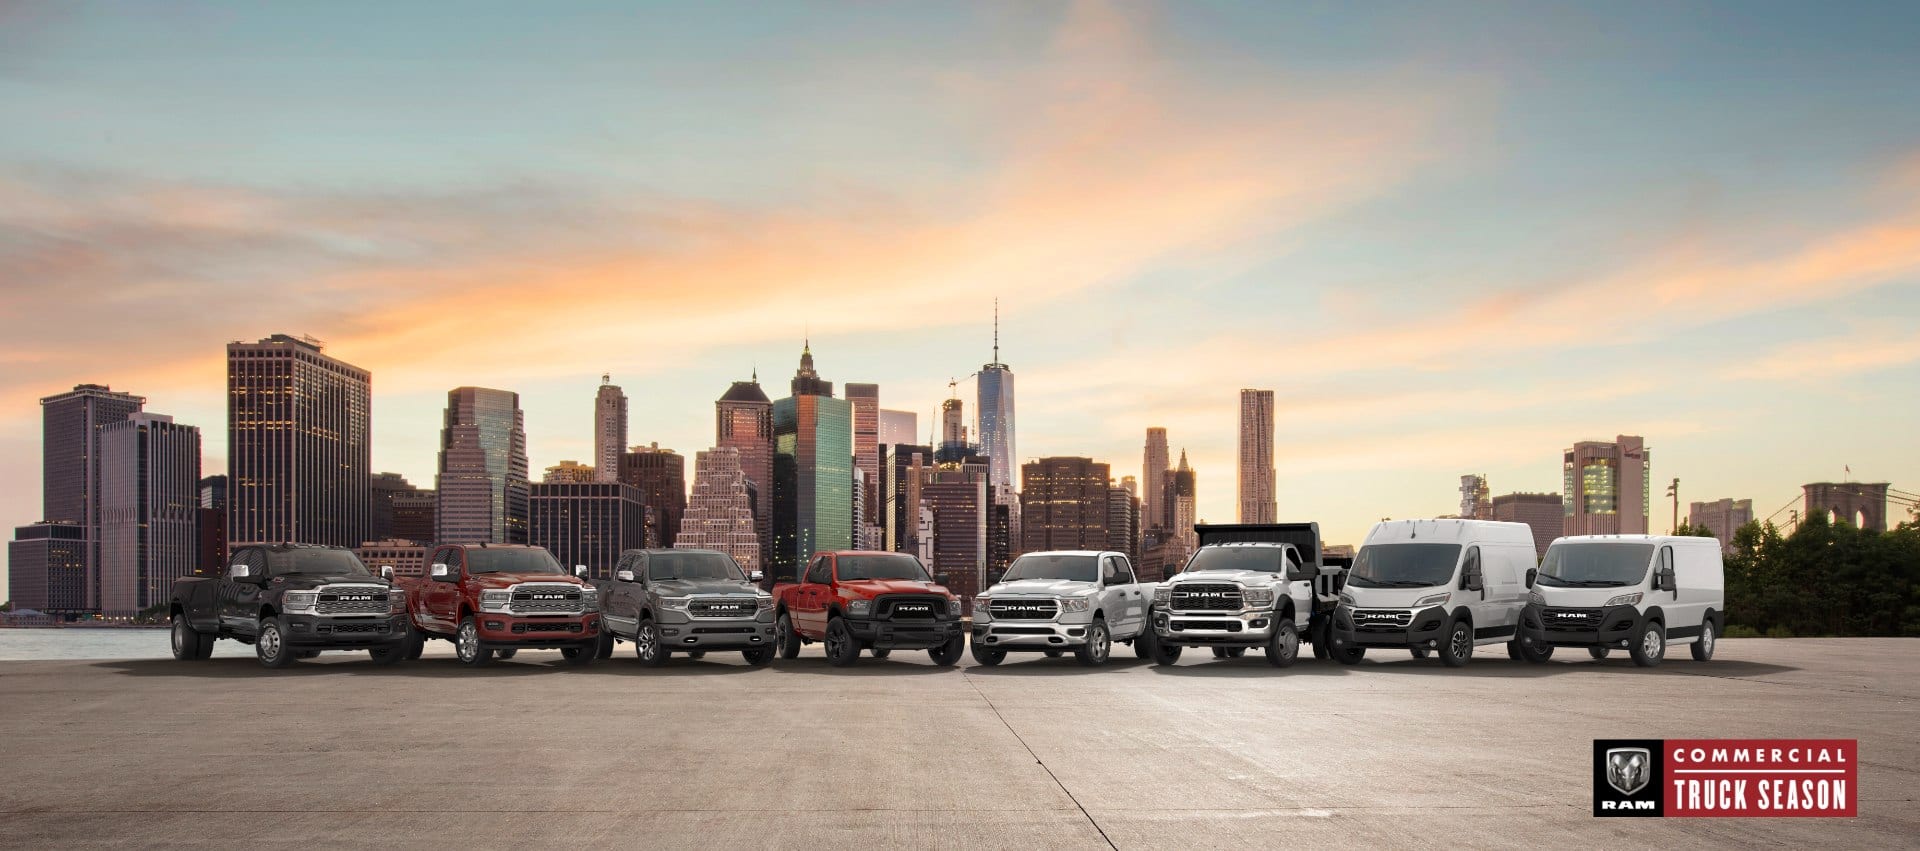 The Ram Brand lineup parked side-by-side at dusk, with a cityscape in the background. From left to right: a black 2024 Ram 3500 Limited Crew Cab, a red 2024 Ram 2500 Limited Crew Cab, a gray 2024 Ram 1500 Limited Crew Cab, a red 2024 Ram 1500 Classic Warlock Crew Cab, a white 2024 Ram 1500 Tradesman Crew Cab, a white Ram 5500 Tradesman Chassis Regular Cab with dump body upfit, a white 2024 Ram ProMaster 2500 SLT High Roof Cargo Van and a white 2024 Ram ProMaster 1500 Tradesman Standard Roof Cargo Van. Ram Commercial Truck Season.